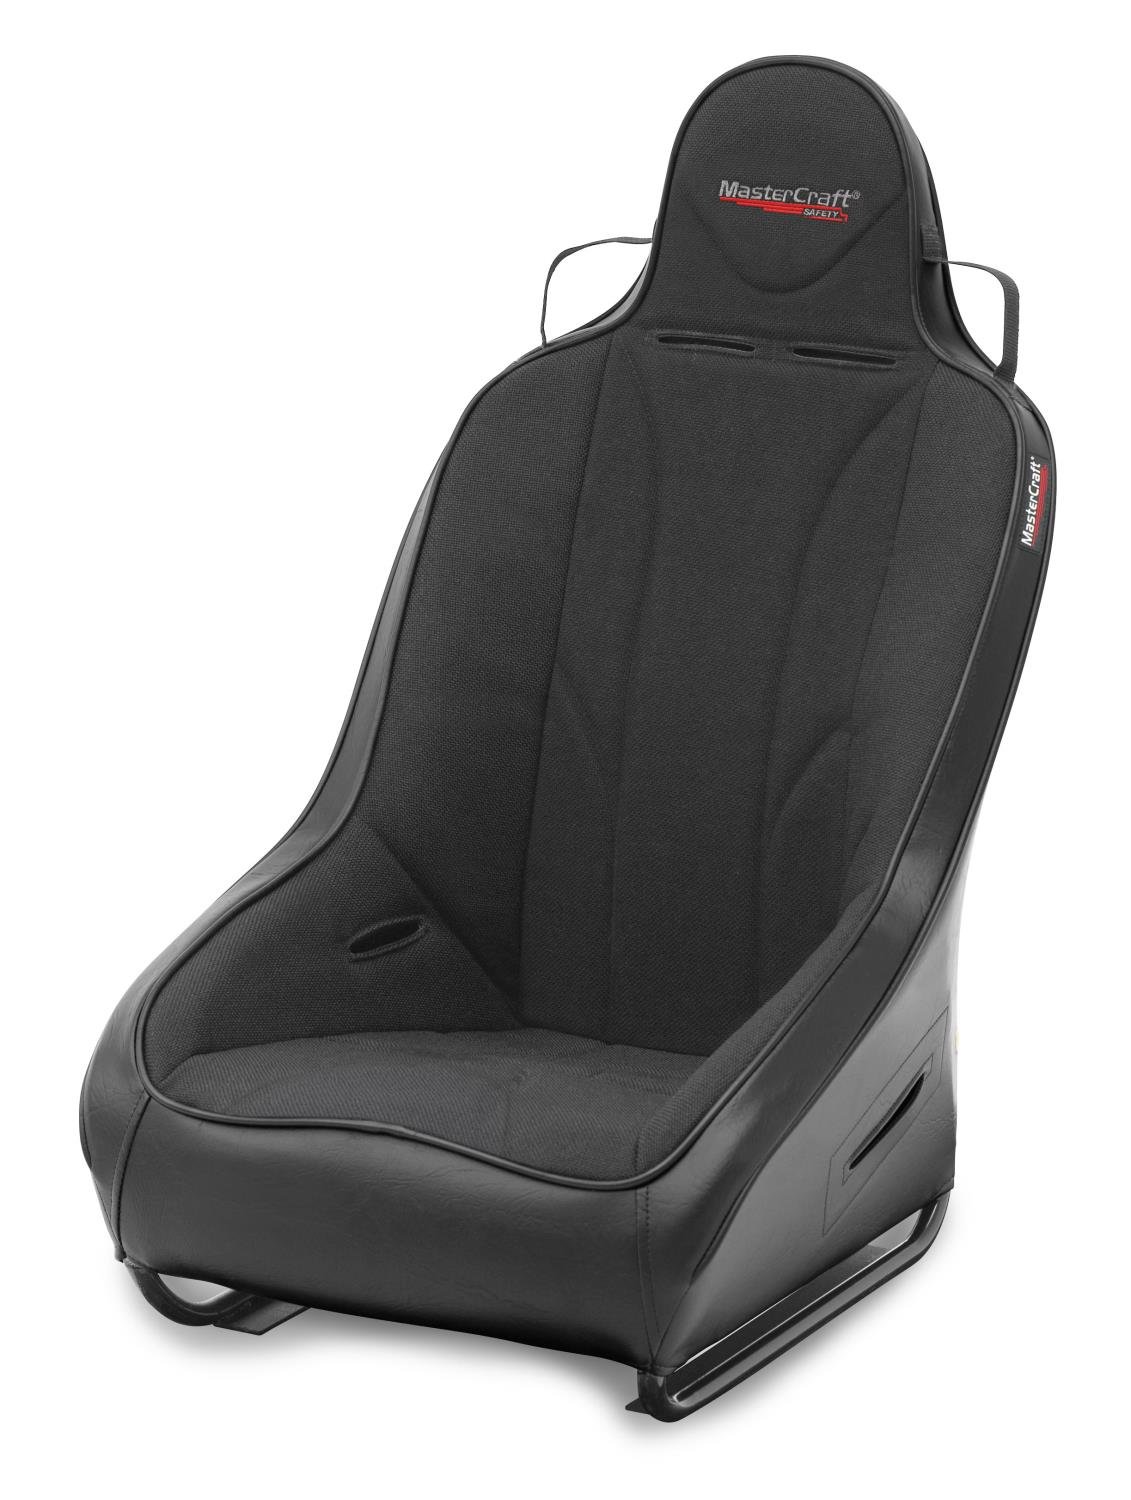 560214 2 in. WIDER PROSeat w/Fixed Headrest, Black with Black Fabric Center and Side Panels, Black Band w/BRS Stitch Pattern